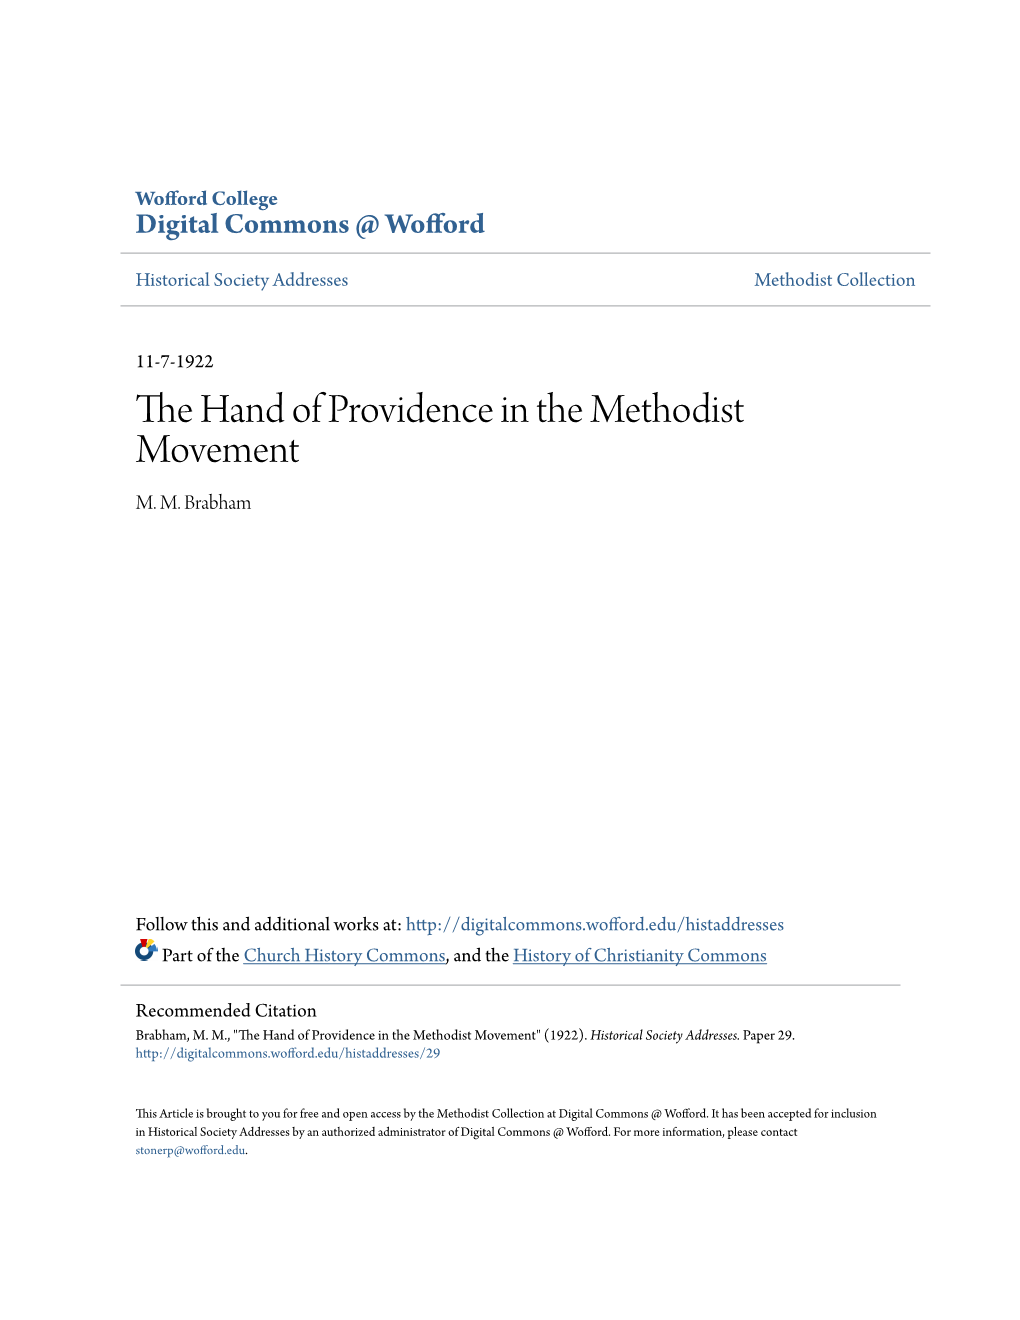 The Hand of Providence in the Methodist Movement